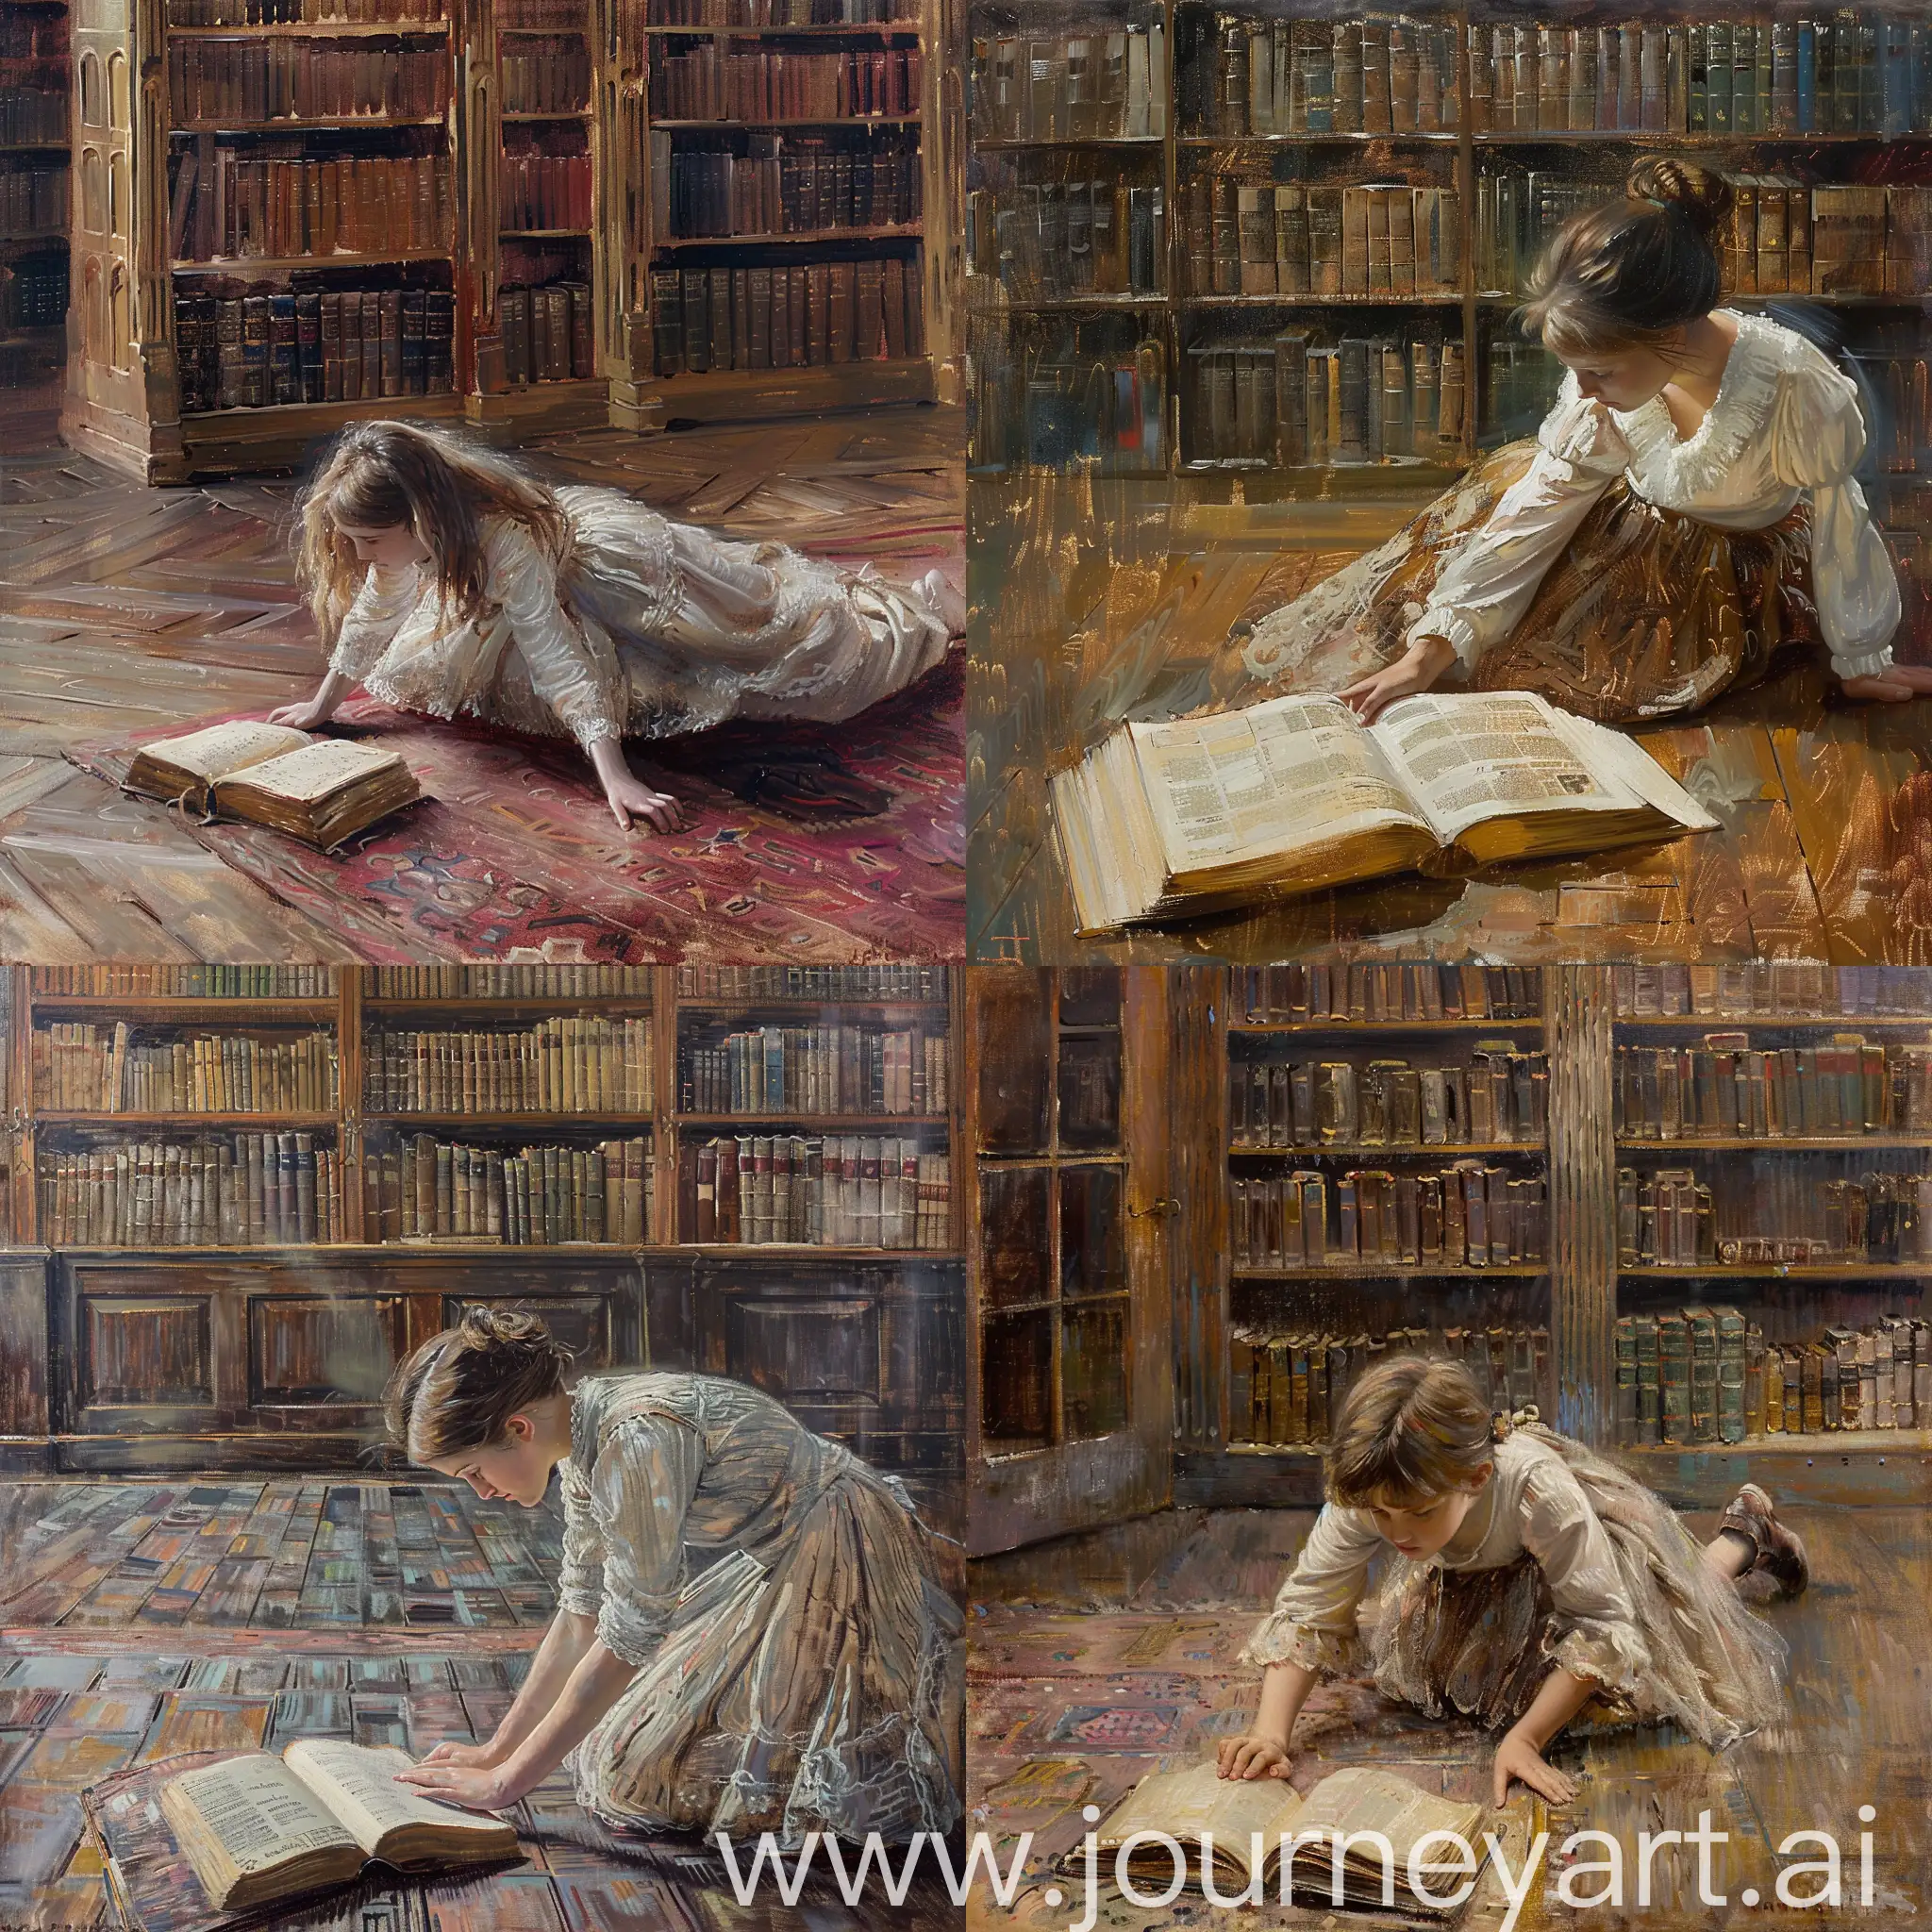 Impressionism, oil painting, scene of the 19th century, Girl seen on the floor with an open book, in the background is an old library